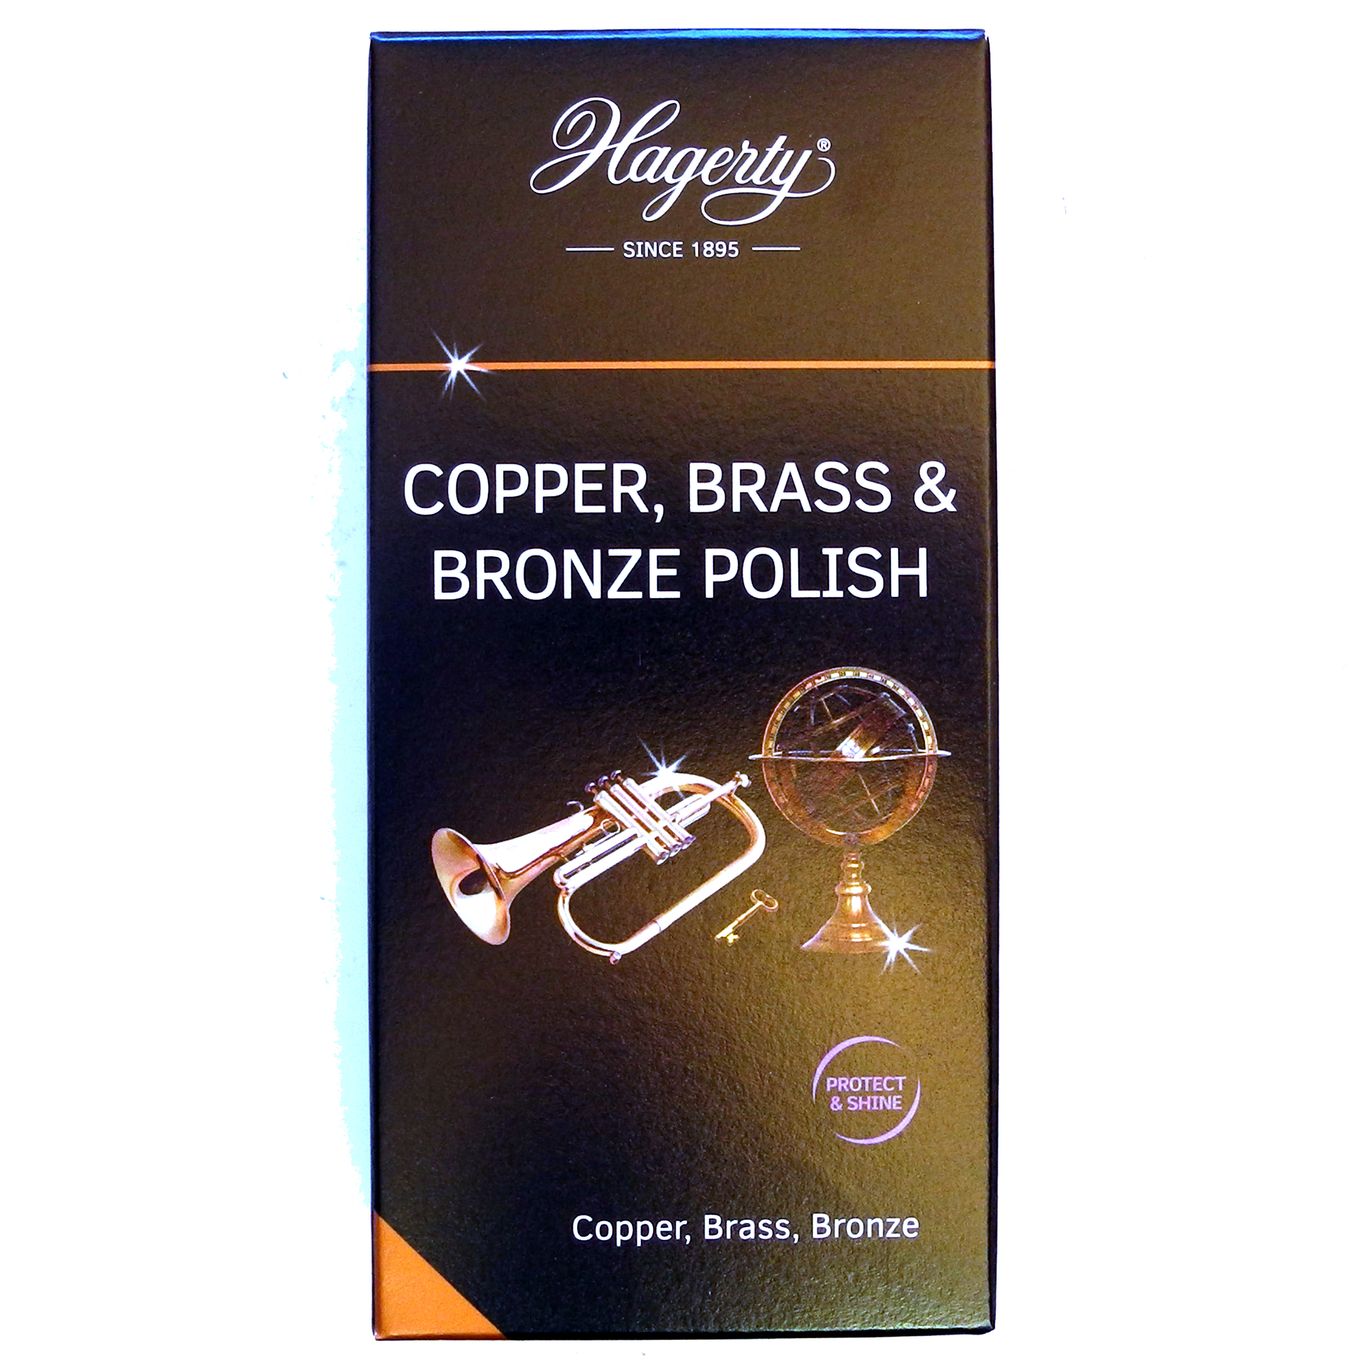 Hagerty 8 Oz. Heavy-Duty Copper, Brass And Metal Polish - Lakewood